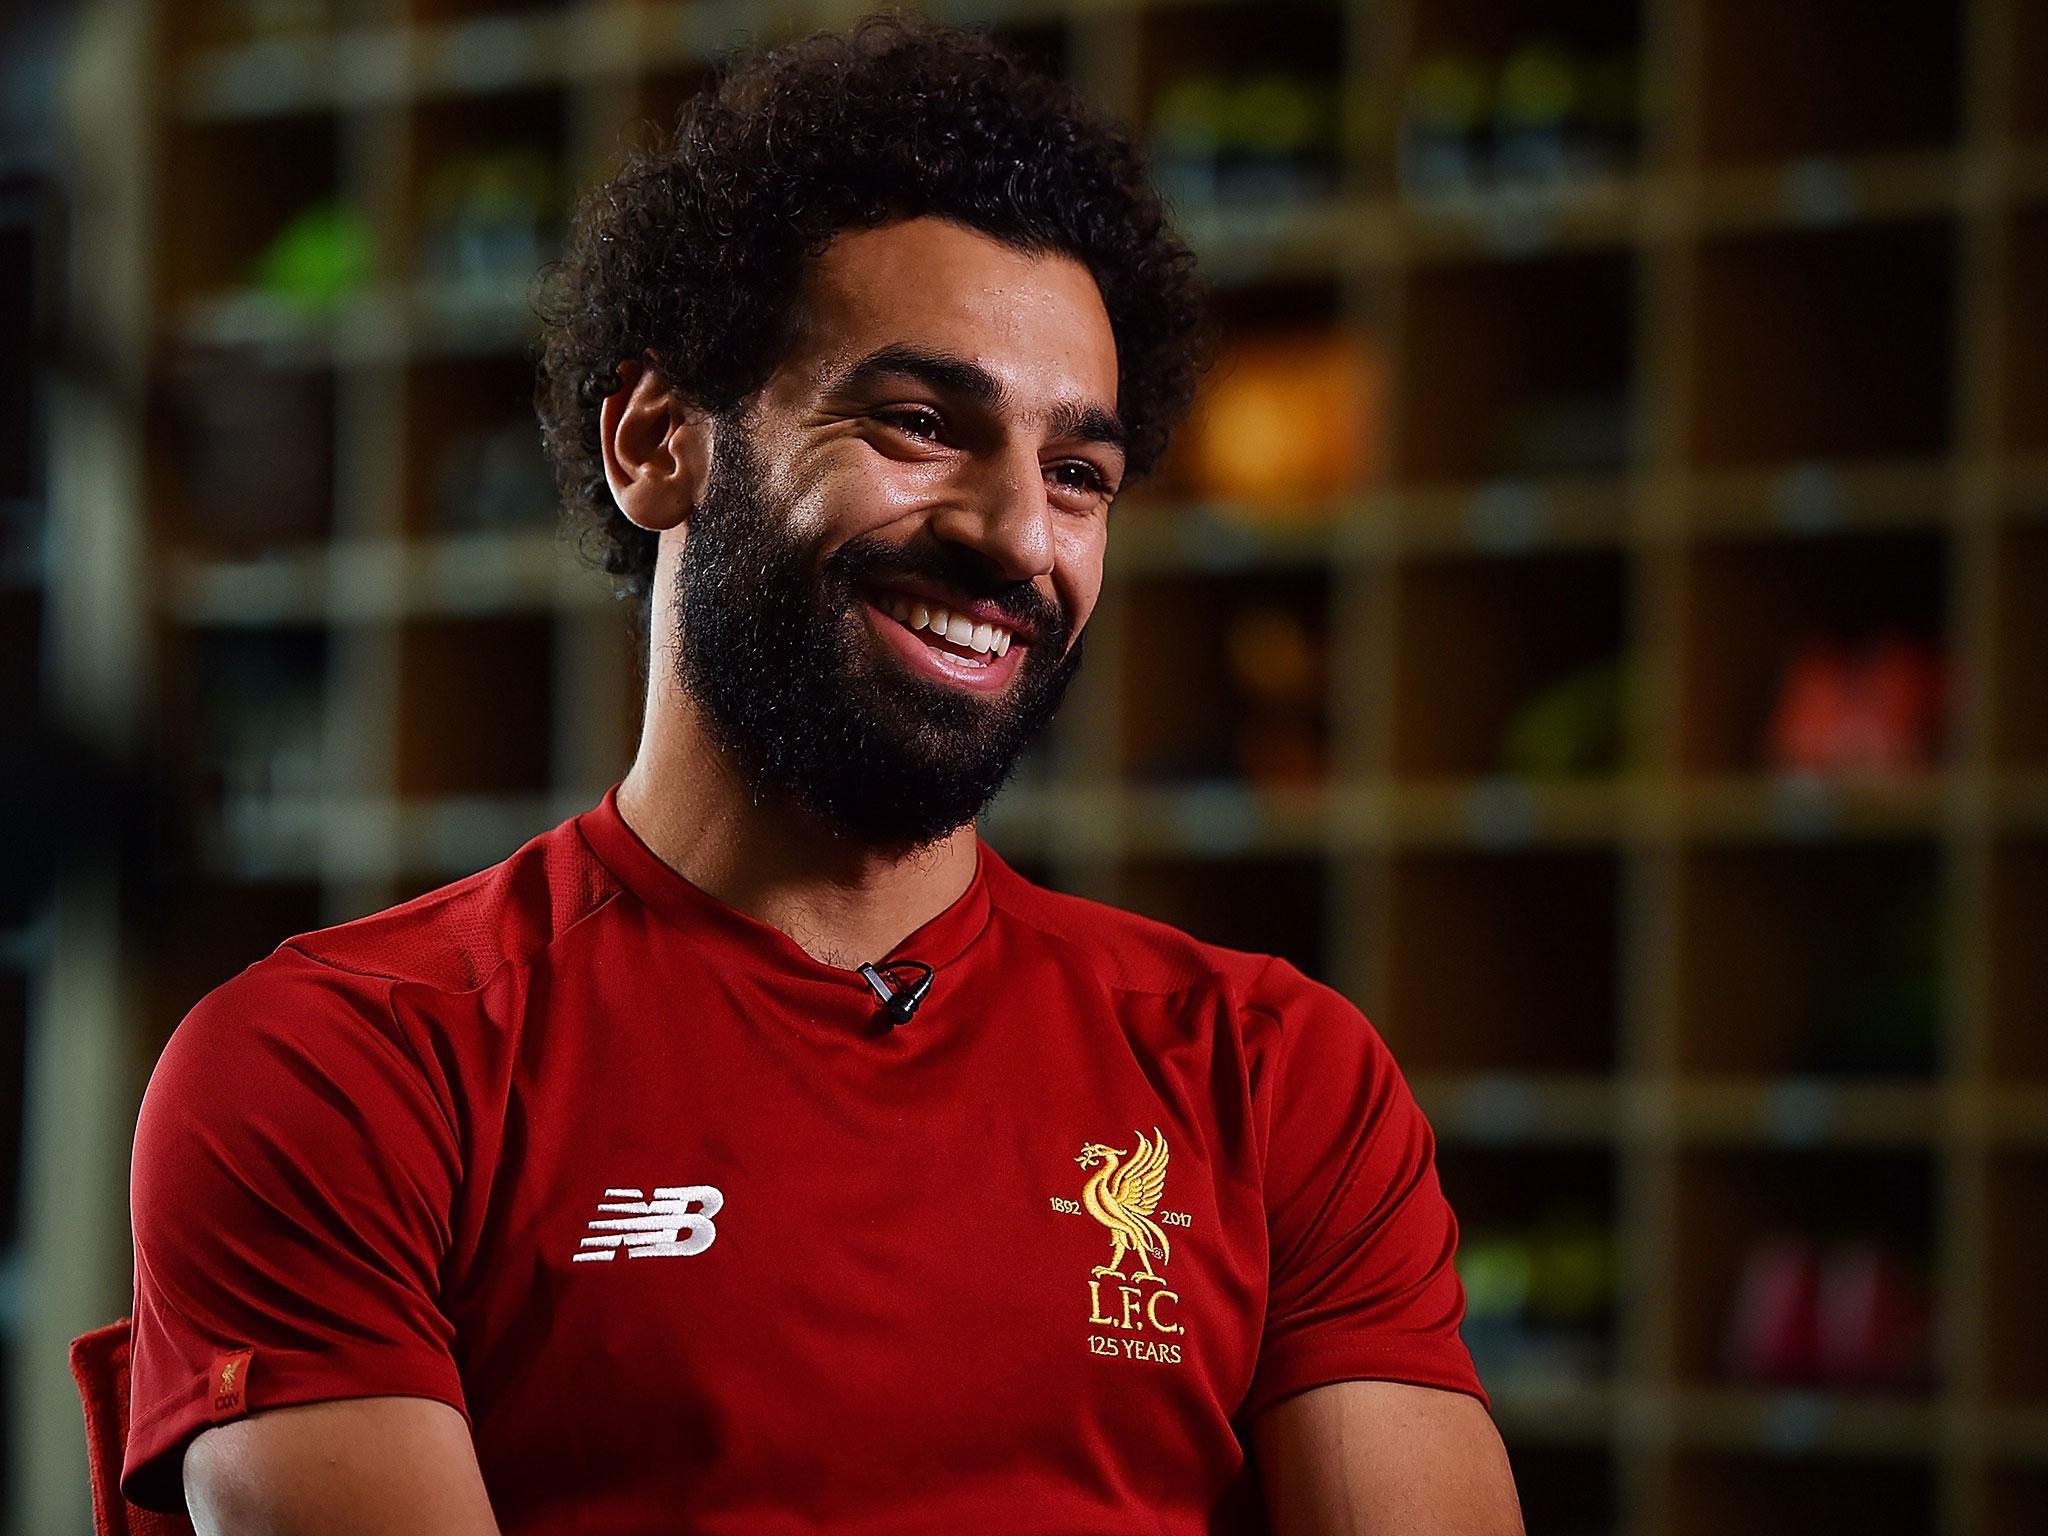 Mohamed Salah has put pen to paper on a five-year deal with the club